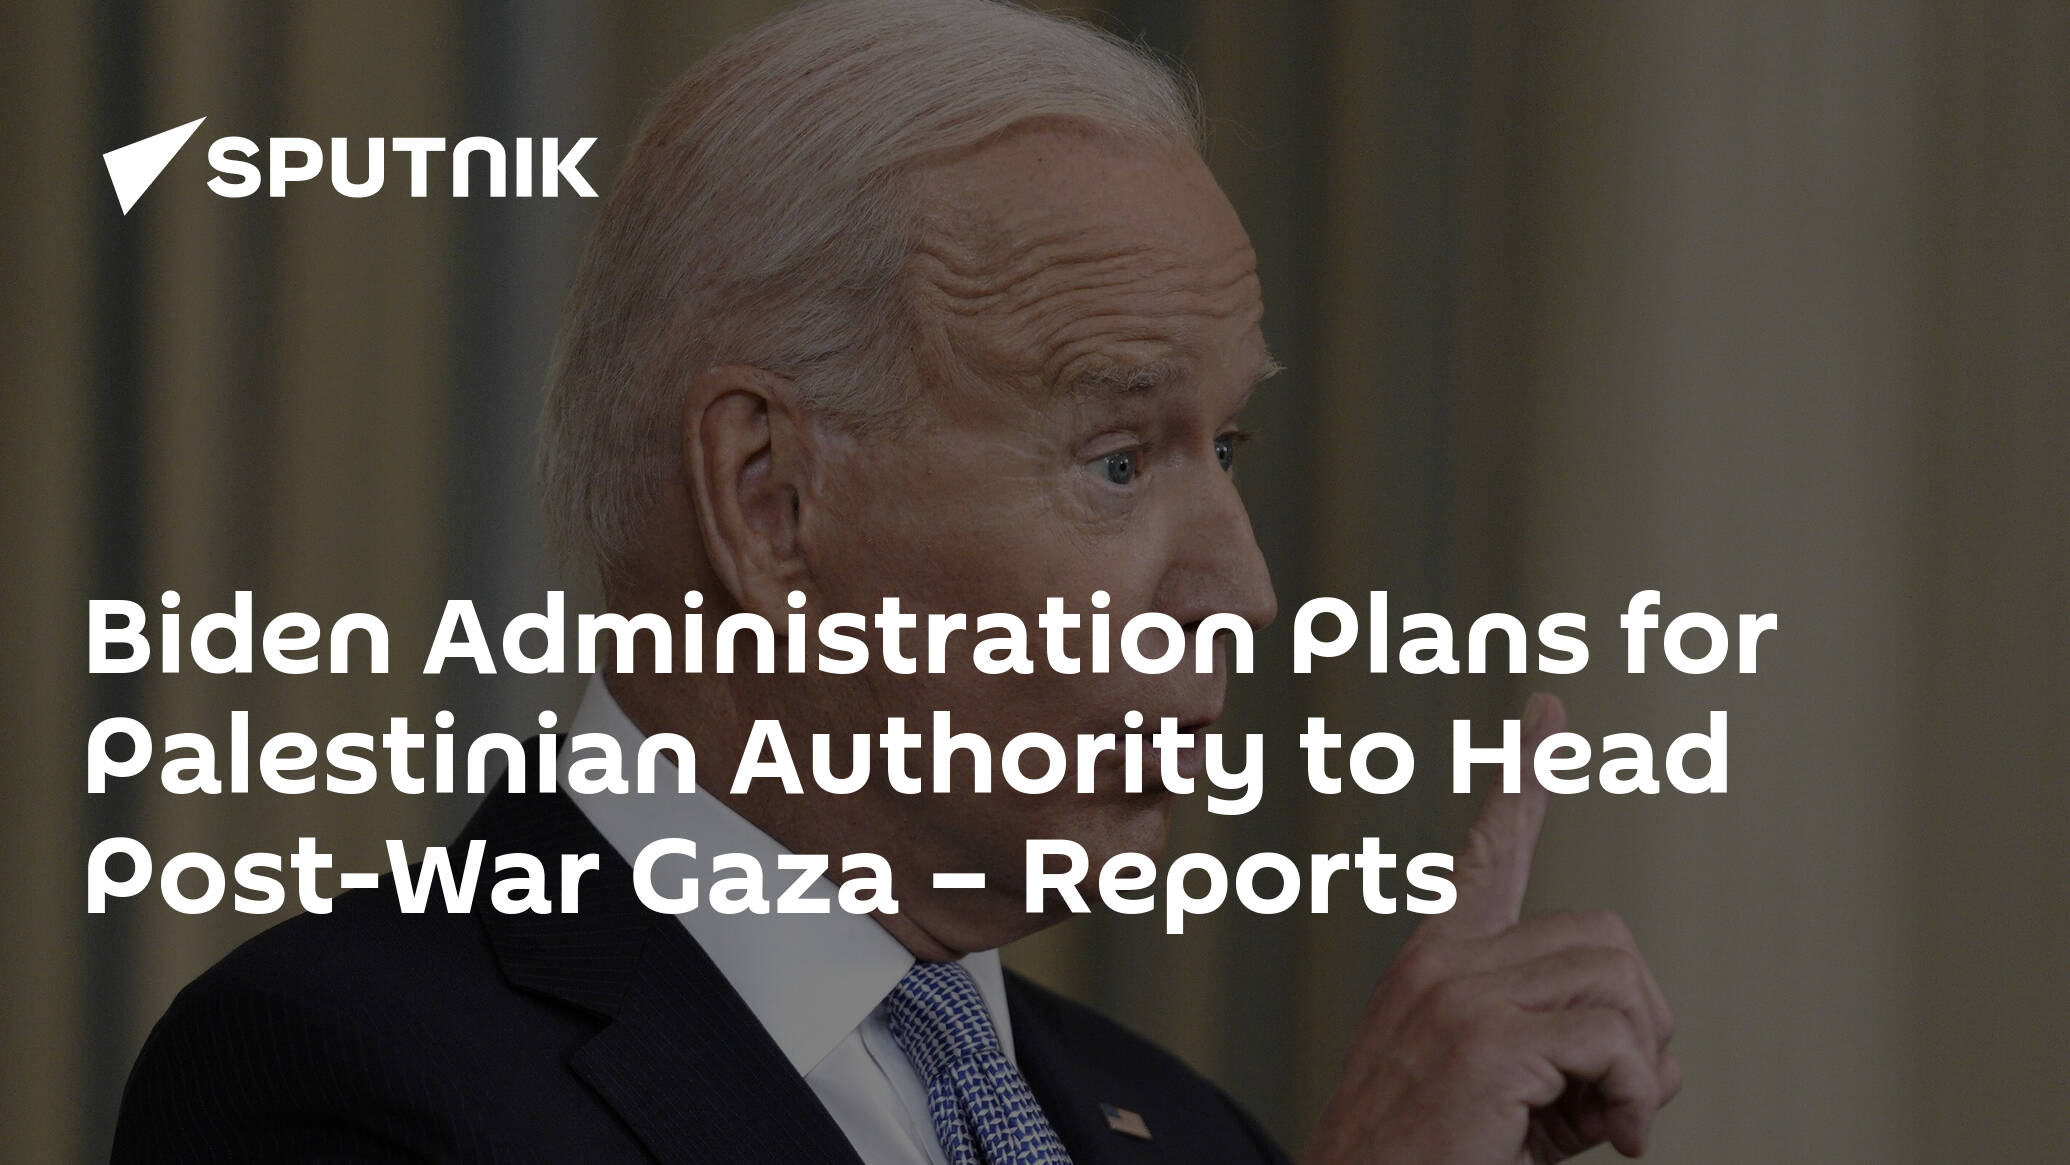 Biden Administration Plans for Palestinian Authority to Head Post-War Gaza – Reports